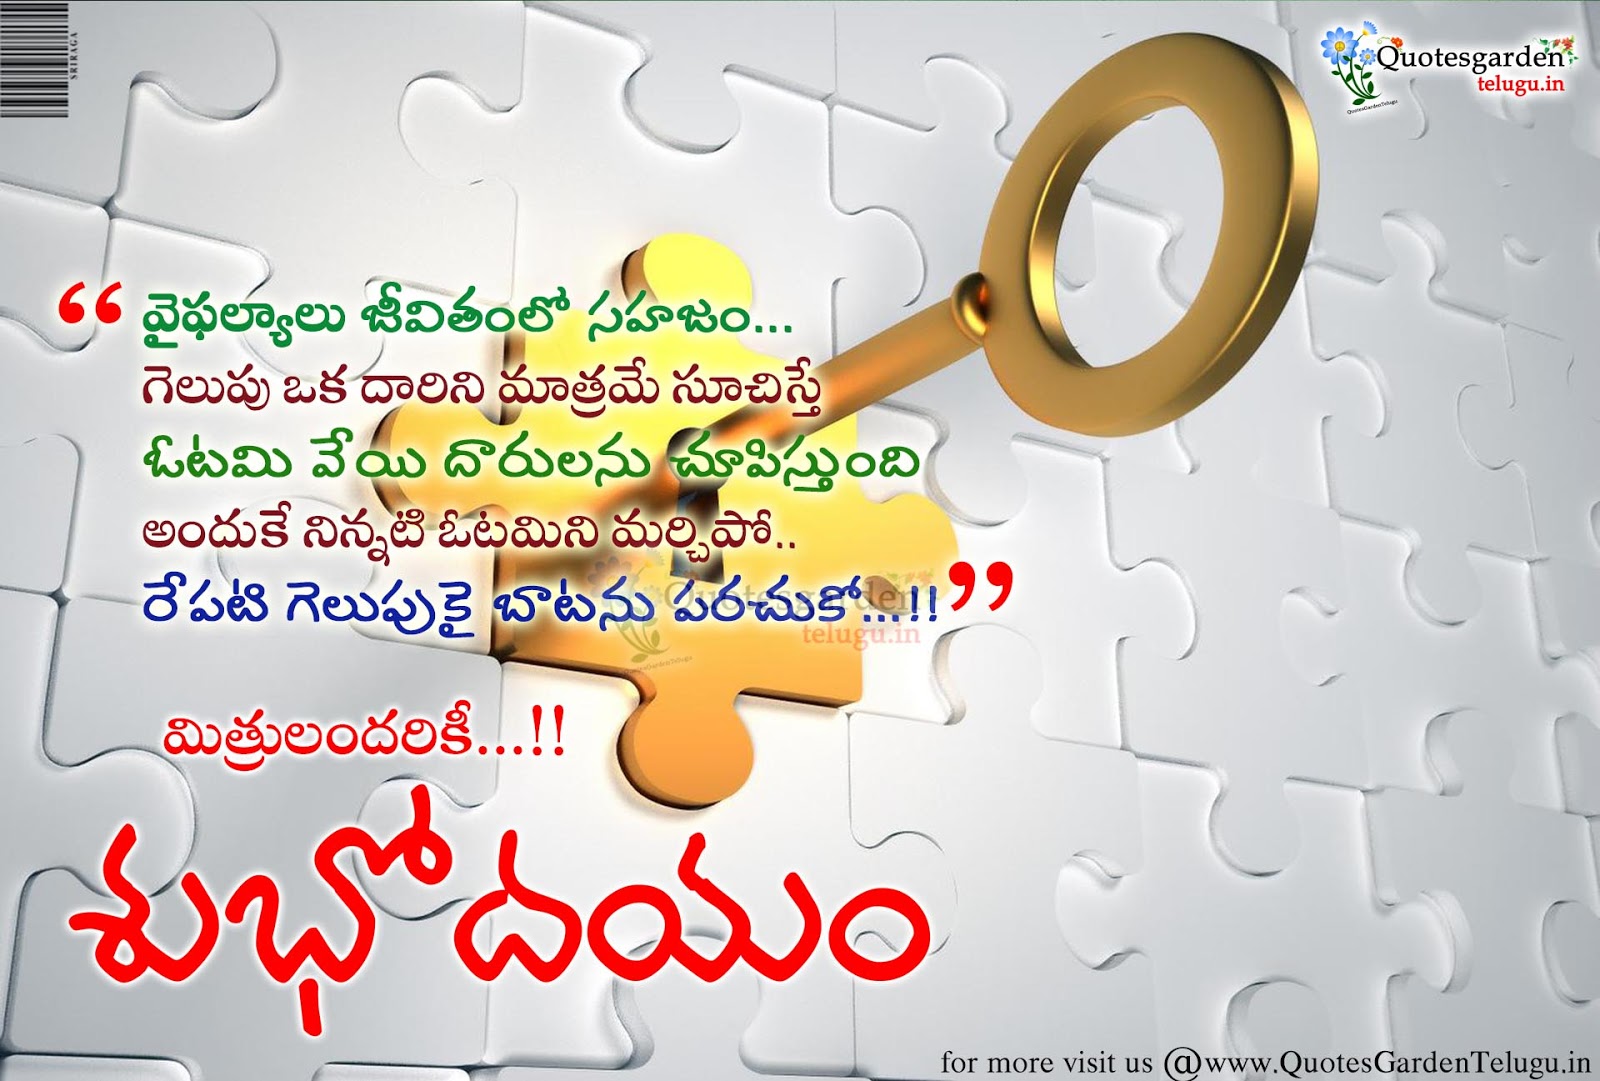 Daily Good morning Telugu quotes wishes free downloads | QUOTES ...